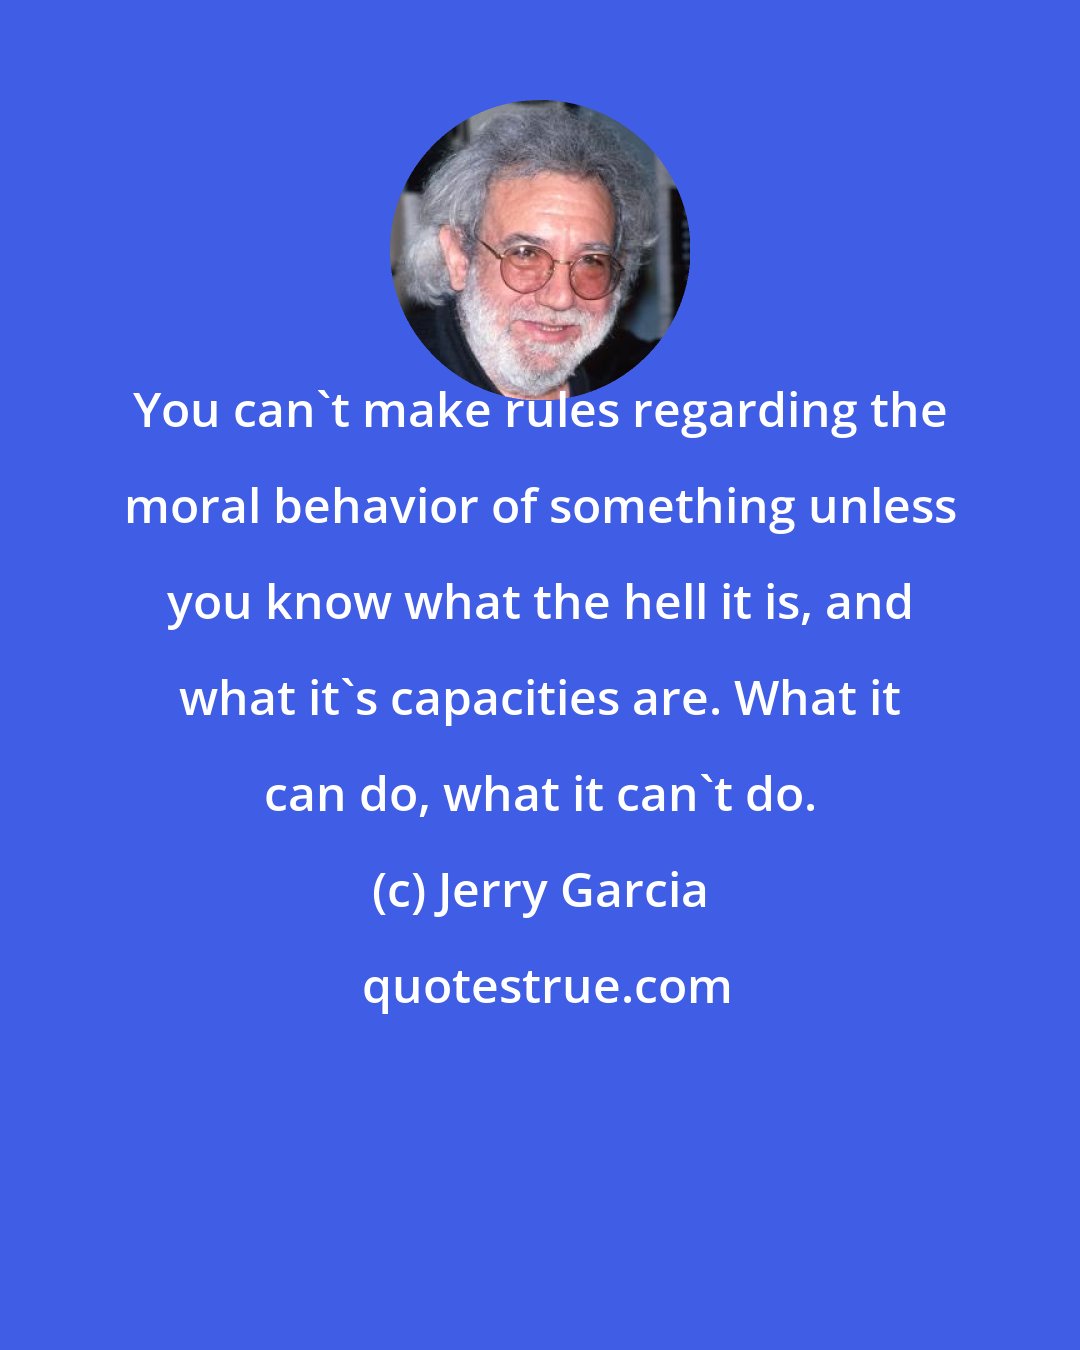 Jerry Garcia: You can't make rules regarding the moral behavior of something unless you know what the hell it is, and what it's capacities are. What it can do, what it can't do.